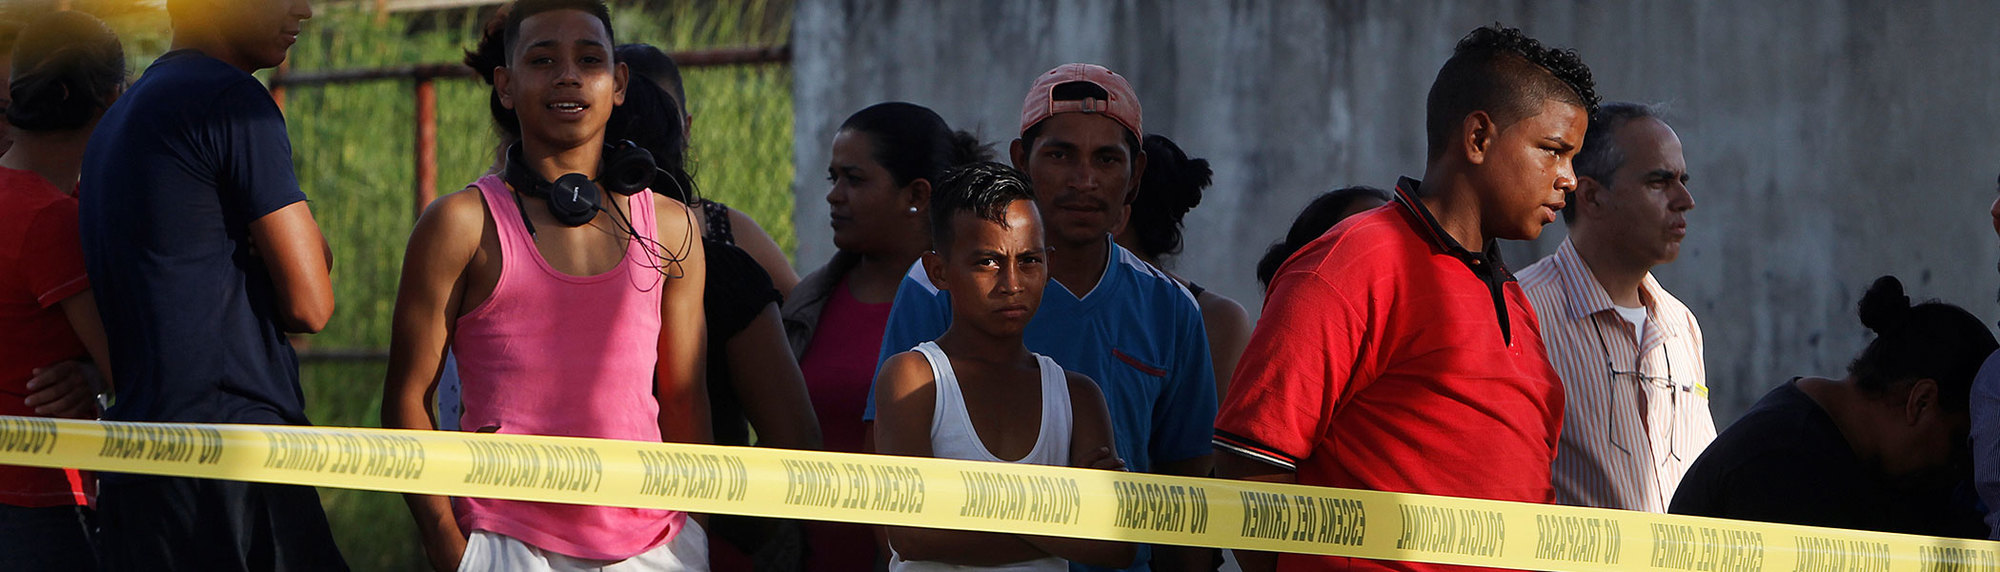 In Central America, Higher Growth Can Lower Crime